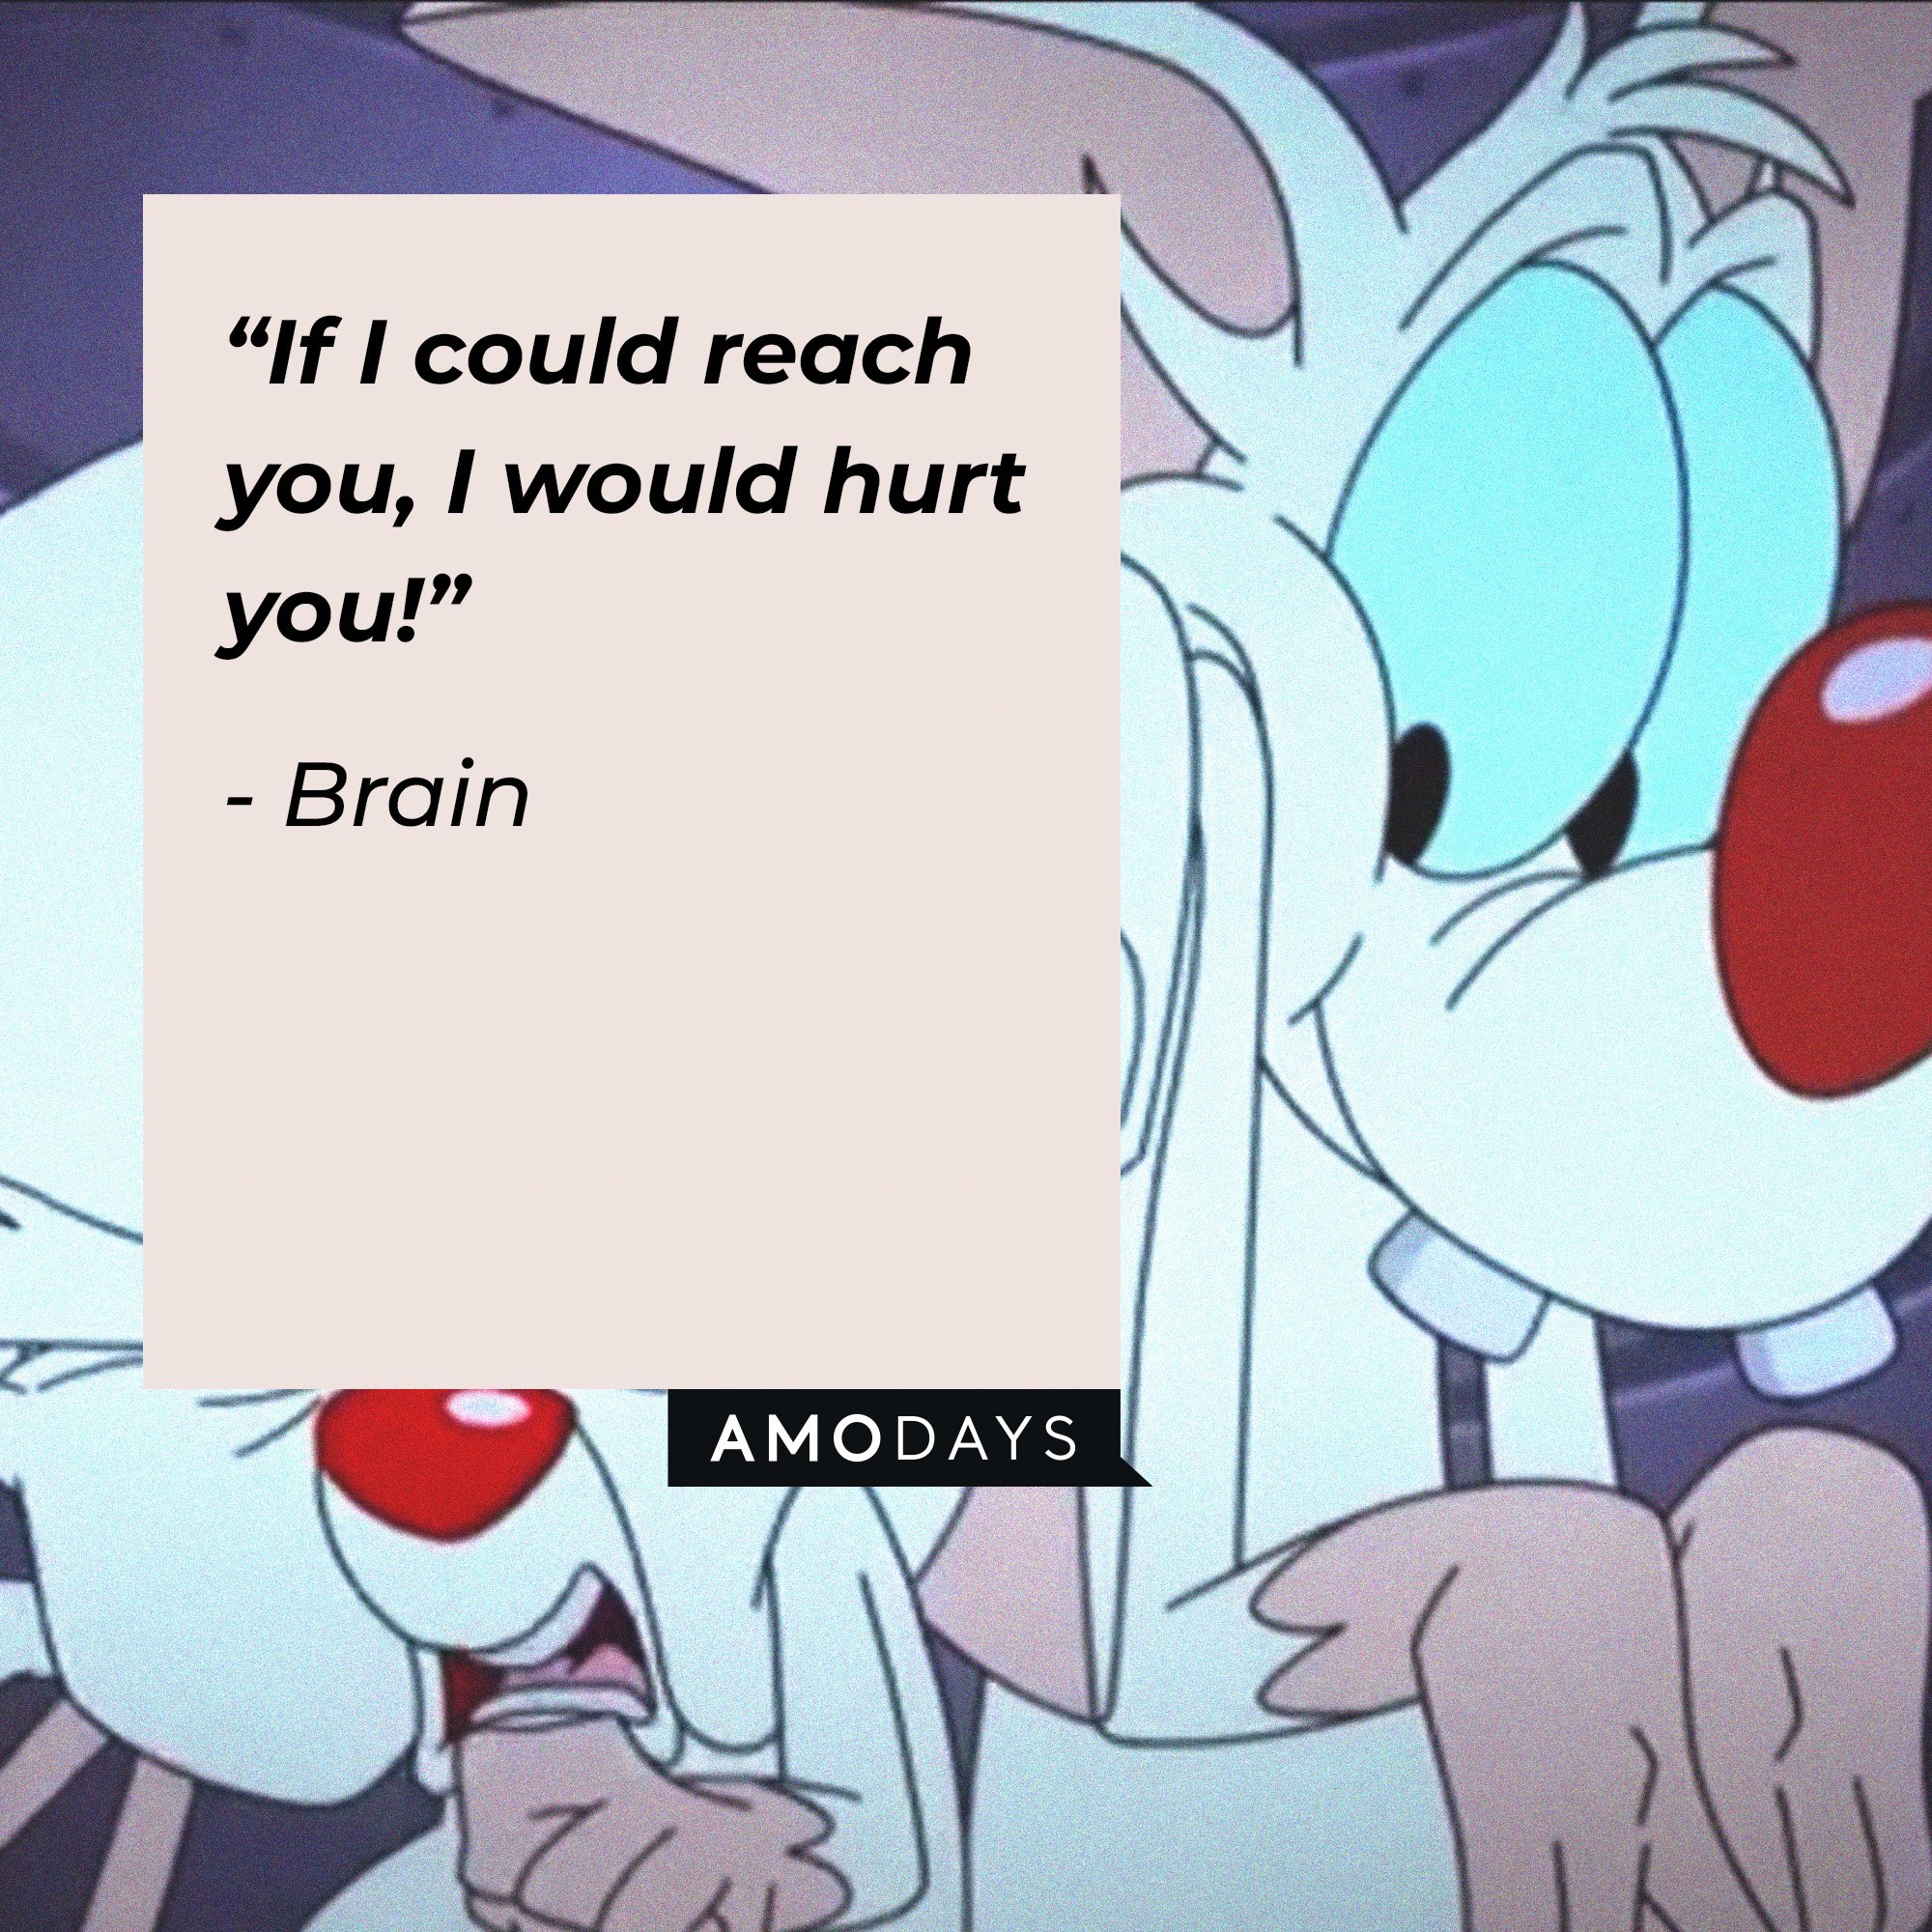  Brain's quote: “If I could reach you, I would hurt you!”| Image: AmoDays